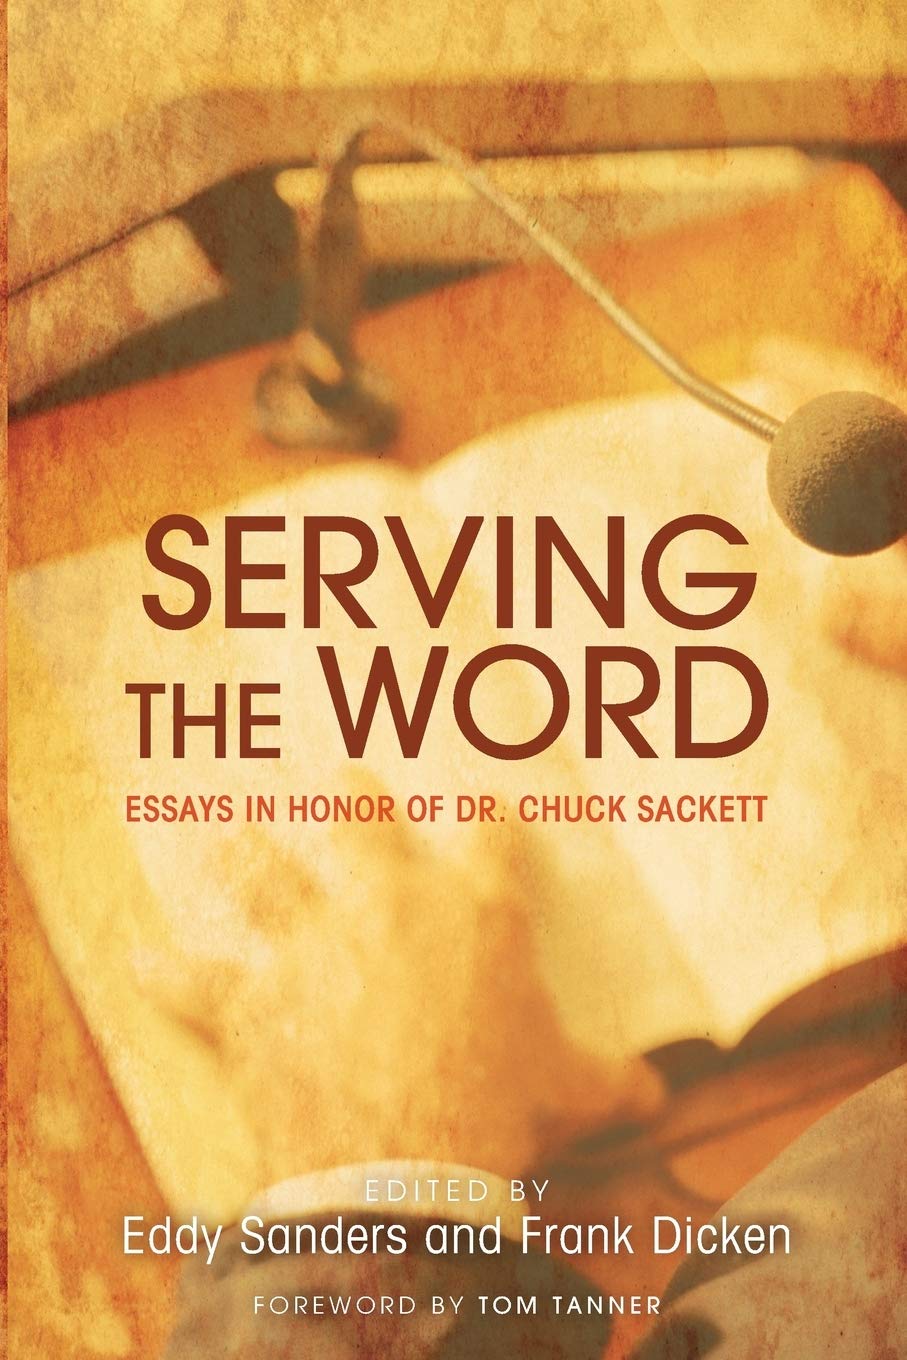 Serving the Word:Essays in Honor of Dr. Chuck Sackett